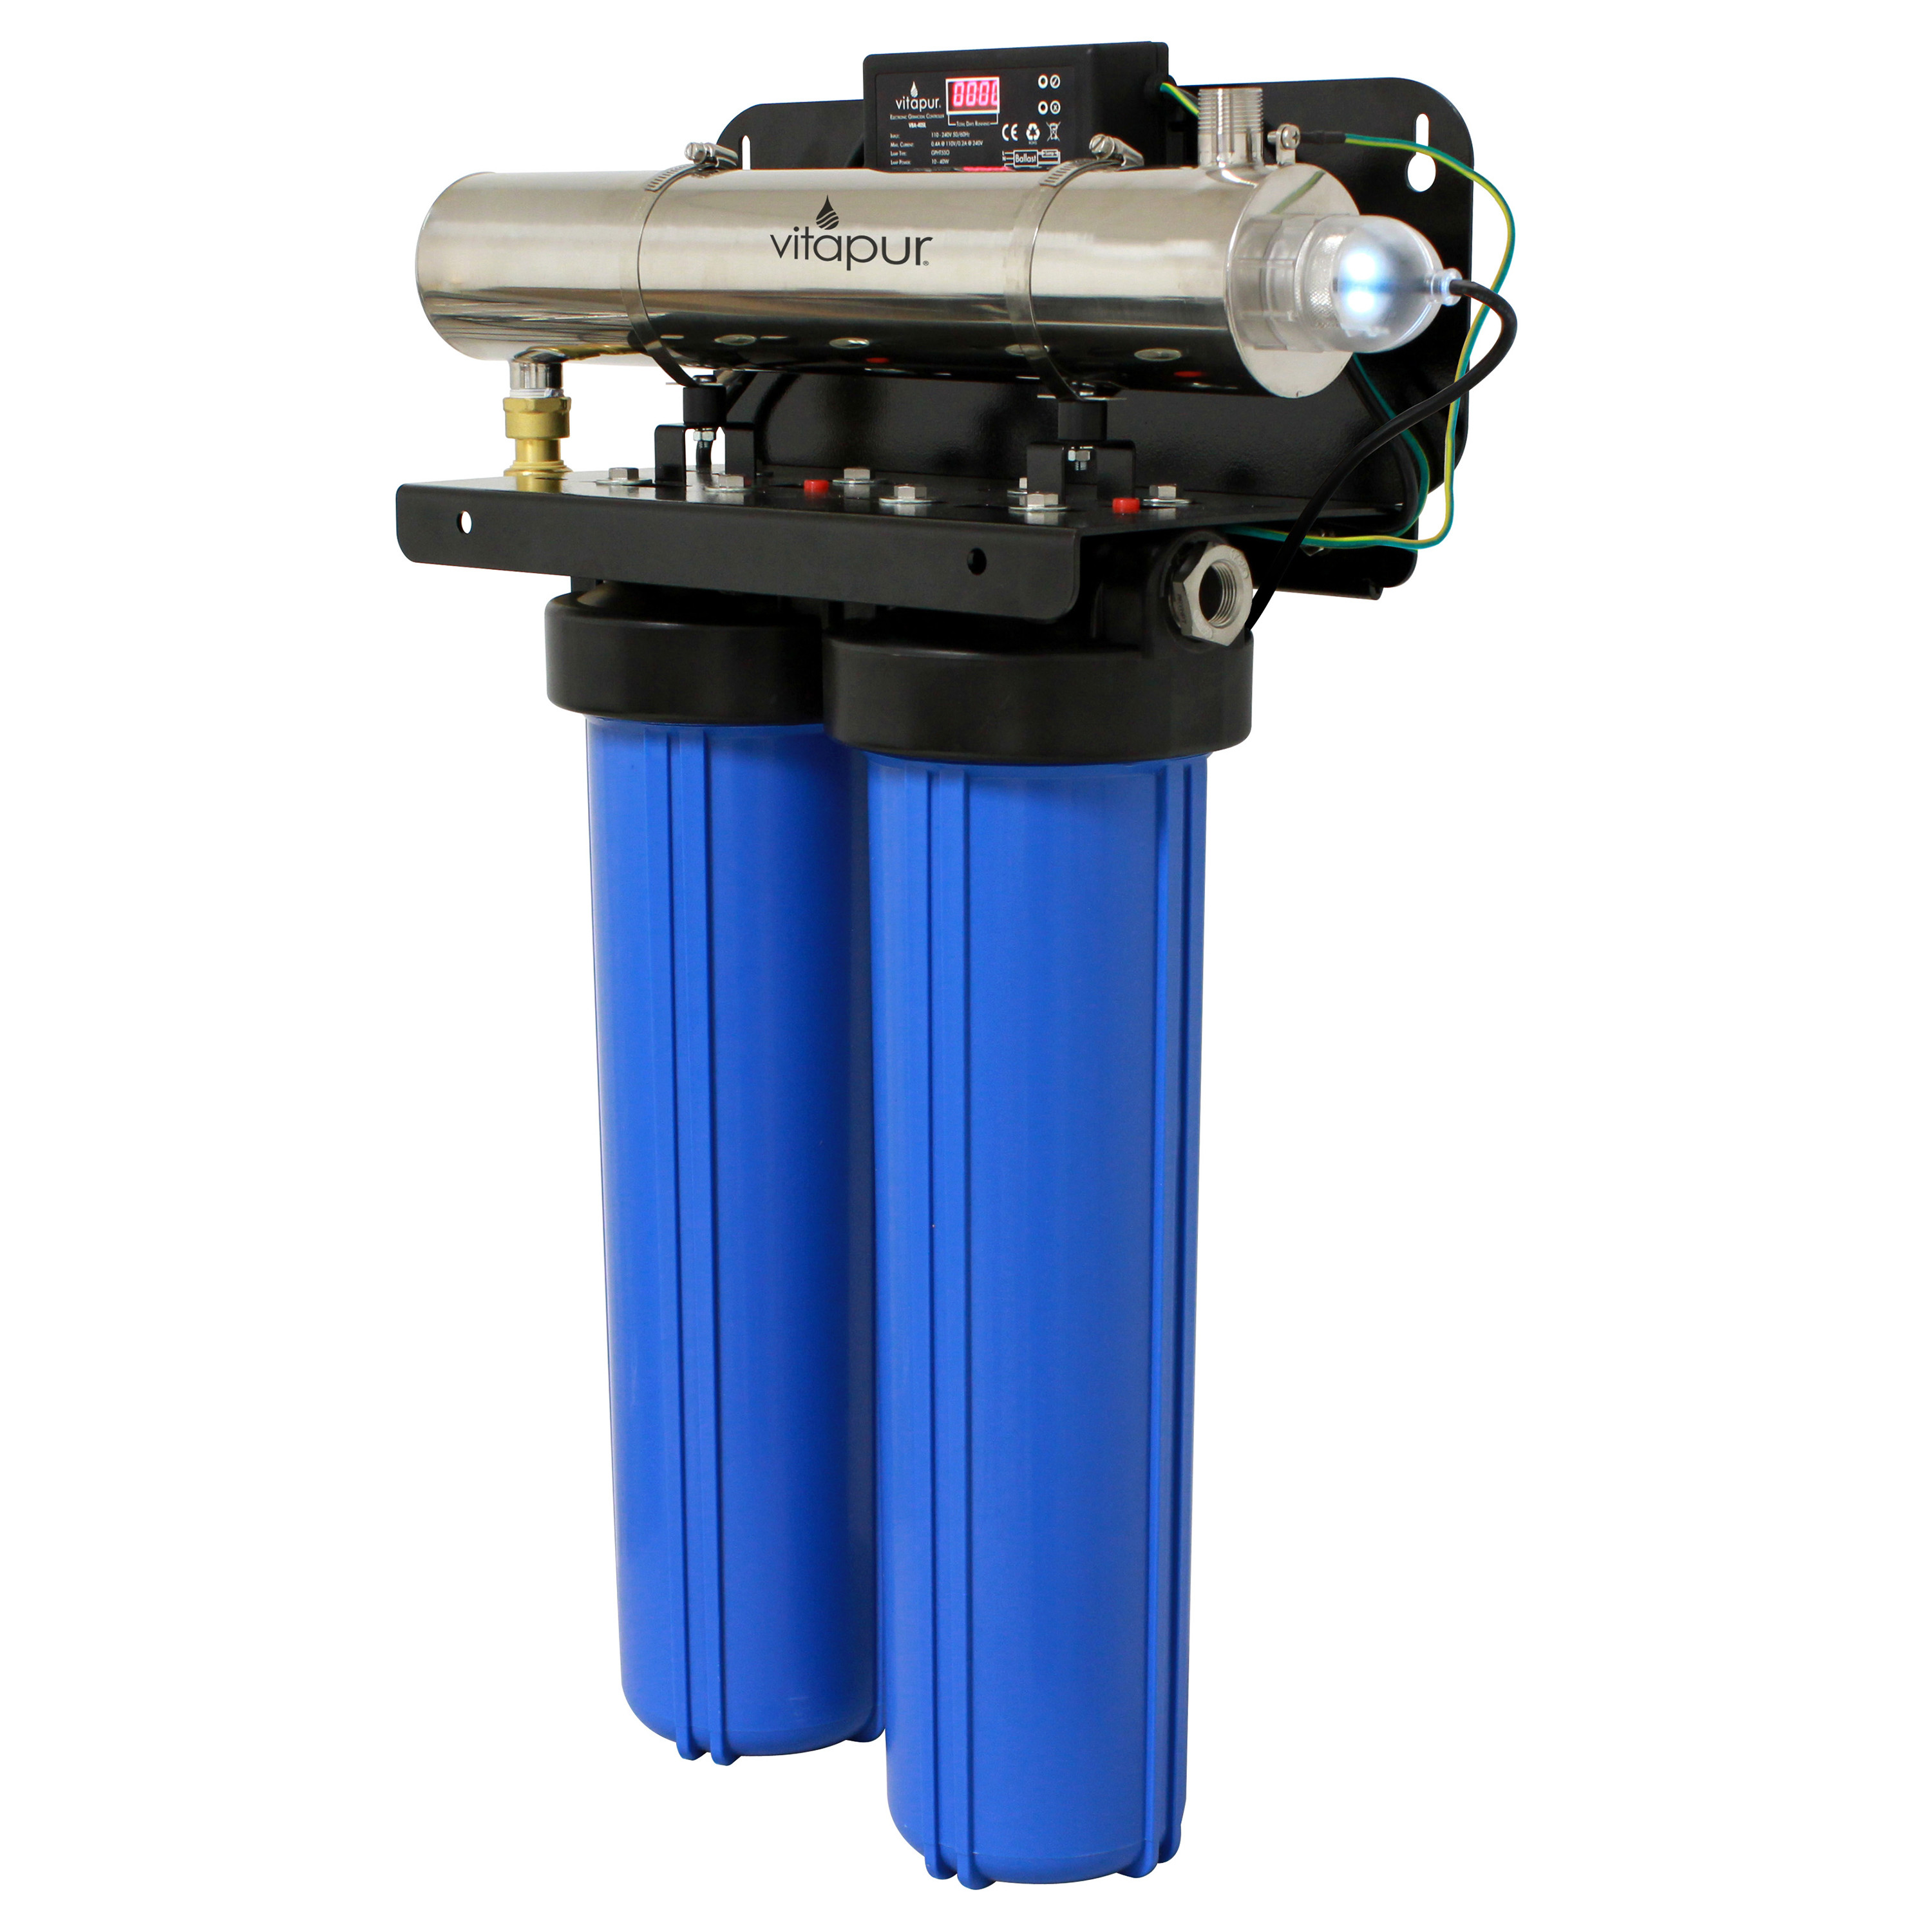 Vitapur Ultraviolet Whole House Water Disinfection And Filtration System 